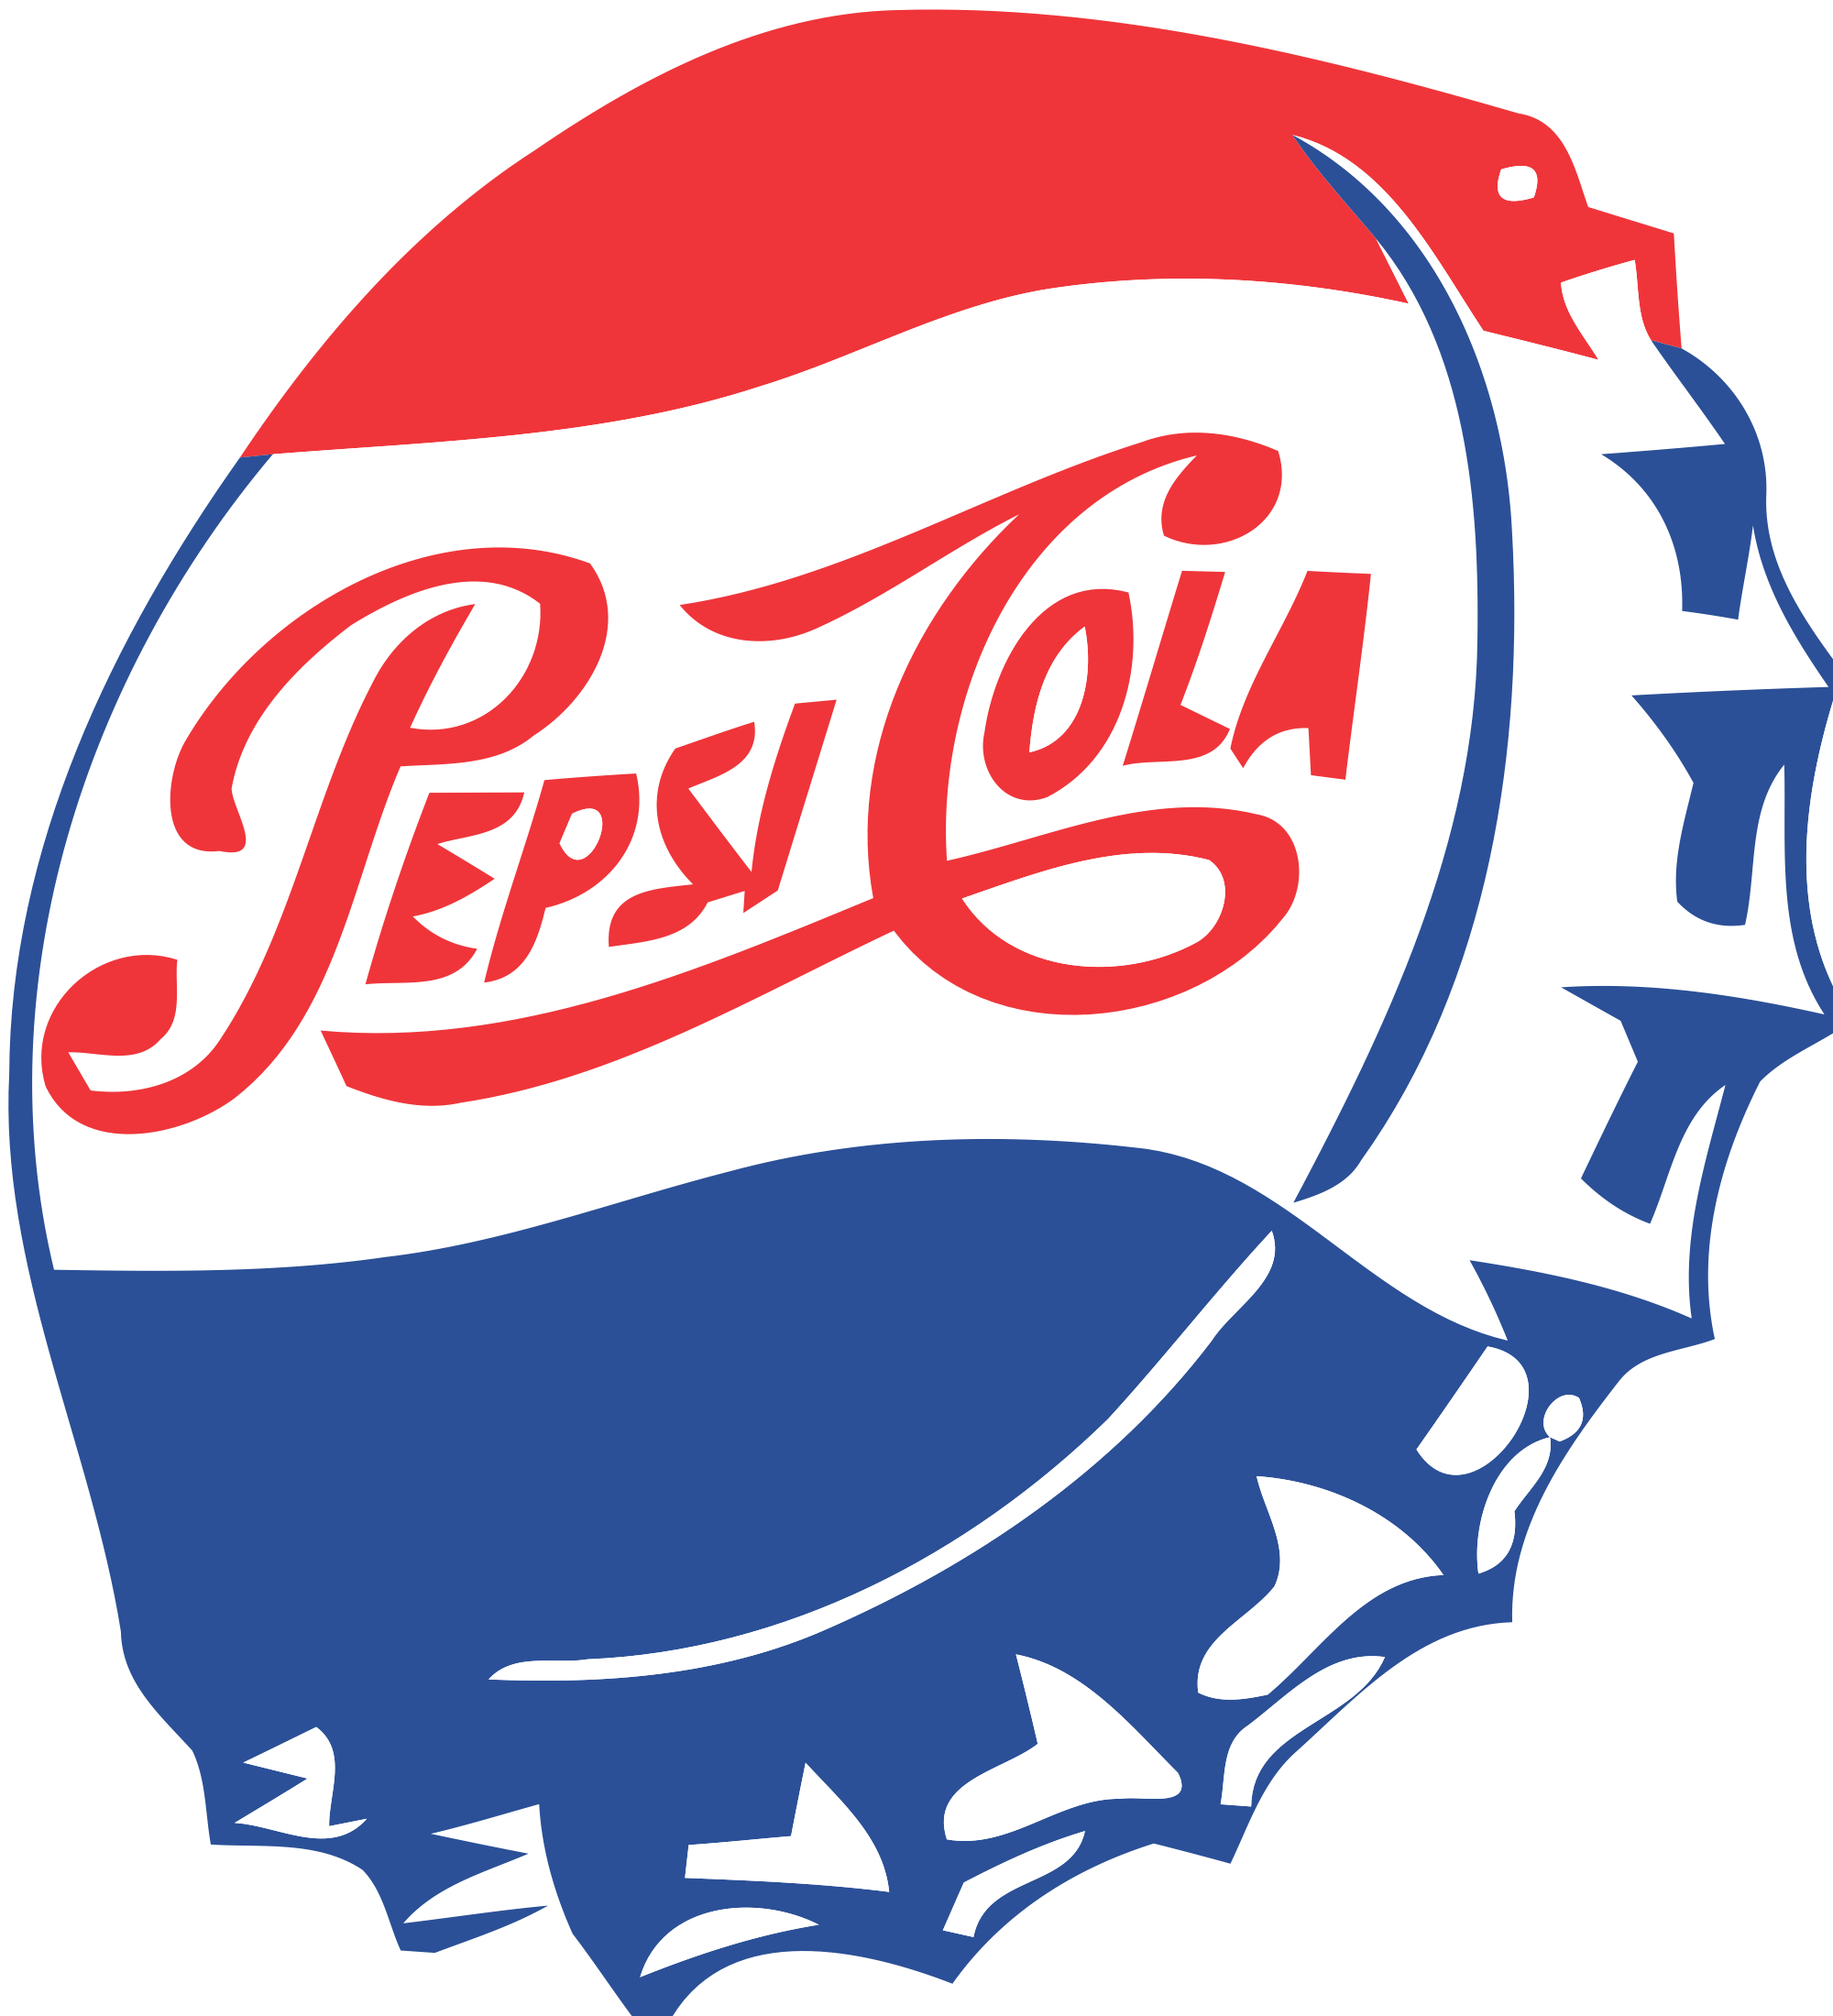 Red White Globe Logo - The Pepsi Globe is the name of the logo for Pepsi, called as such